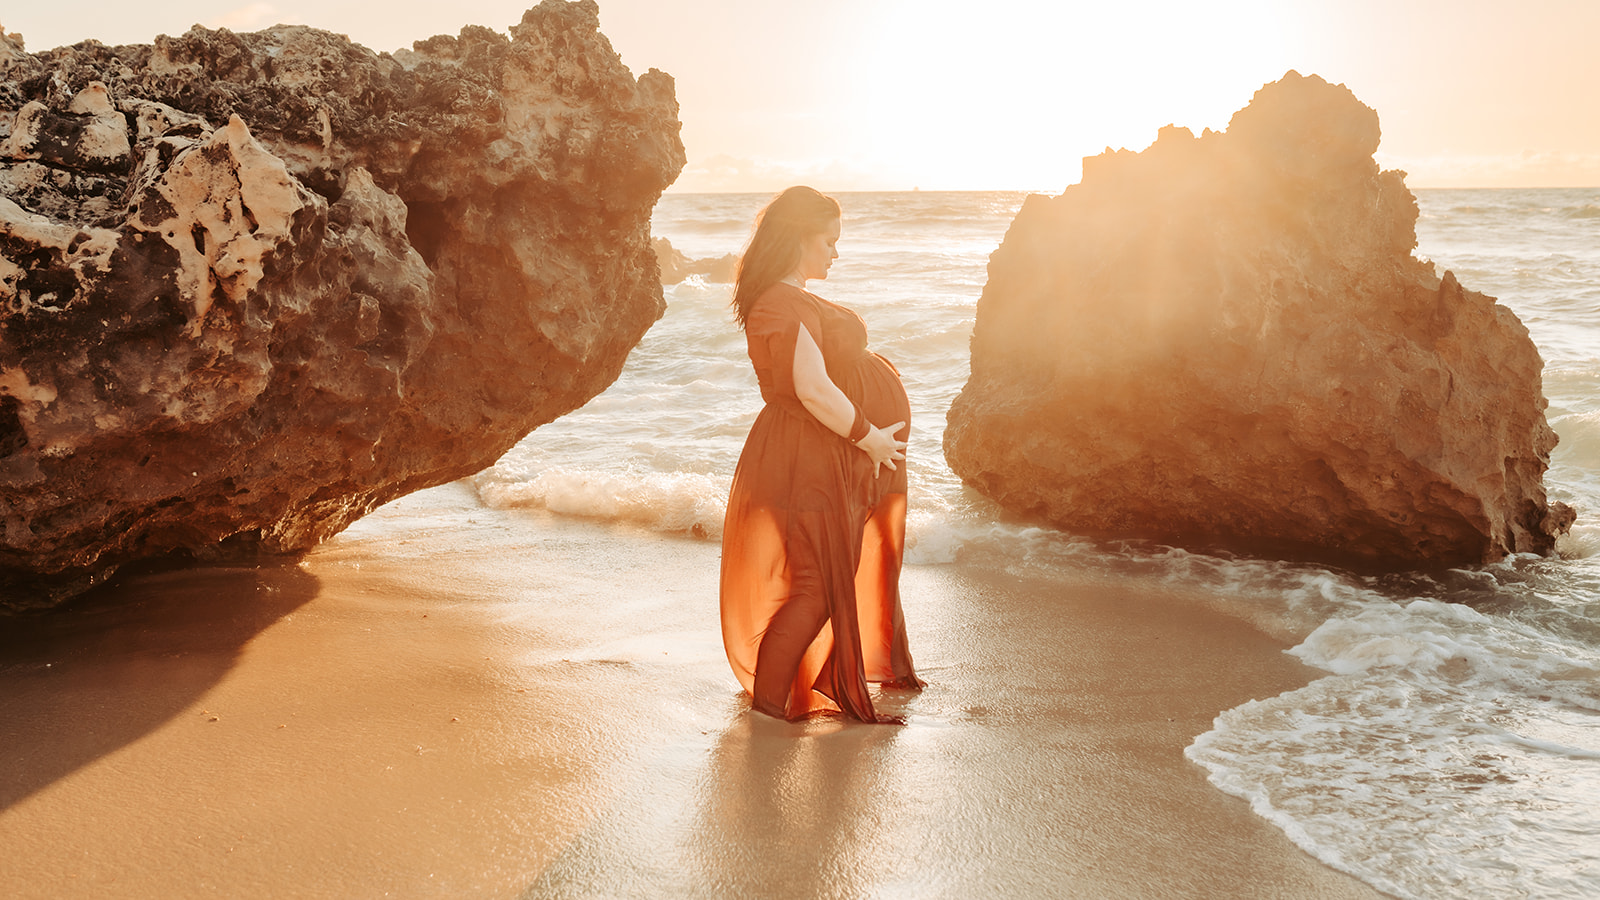 Perth maternity photography at an amazing beach location